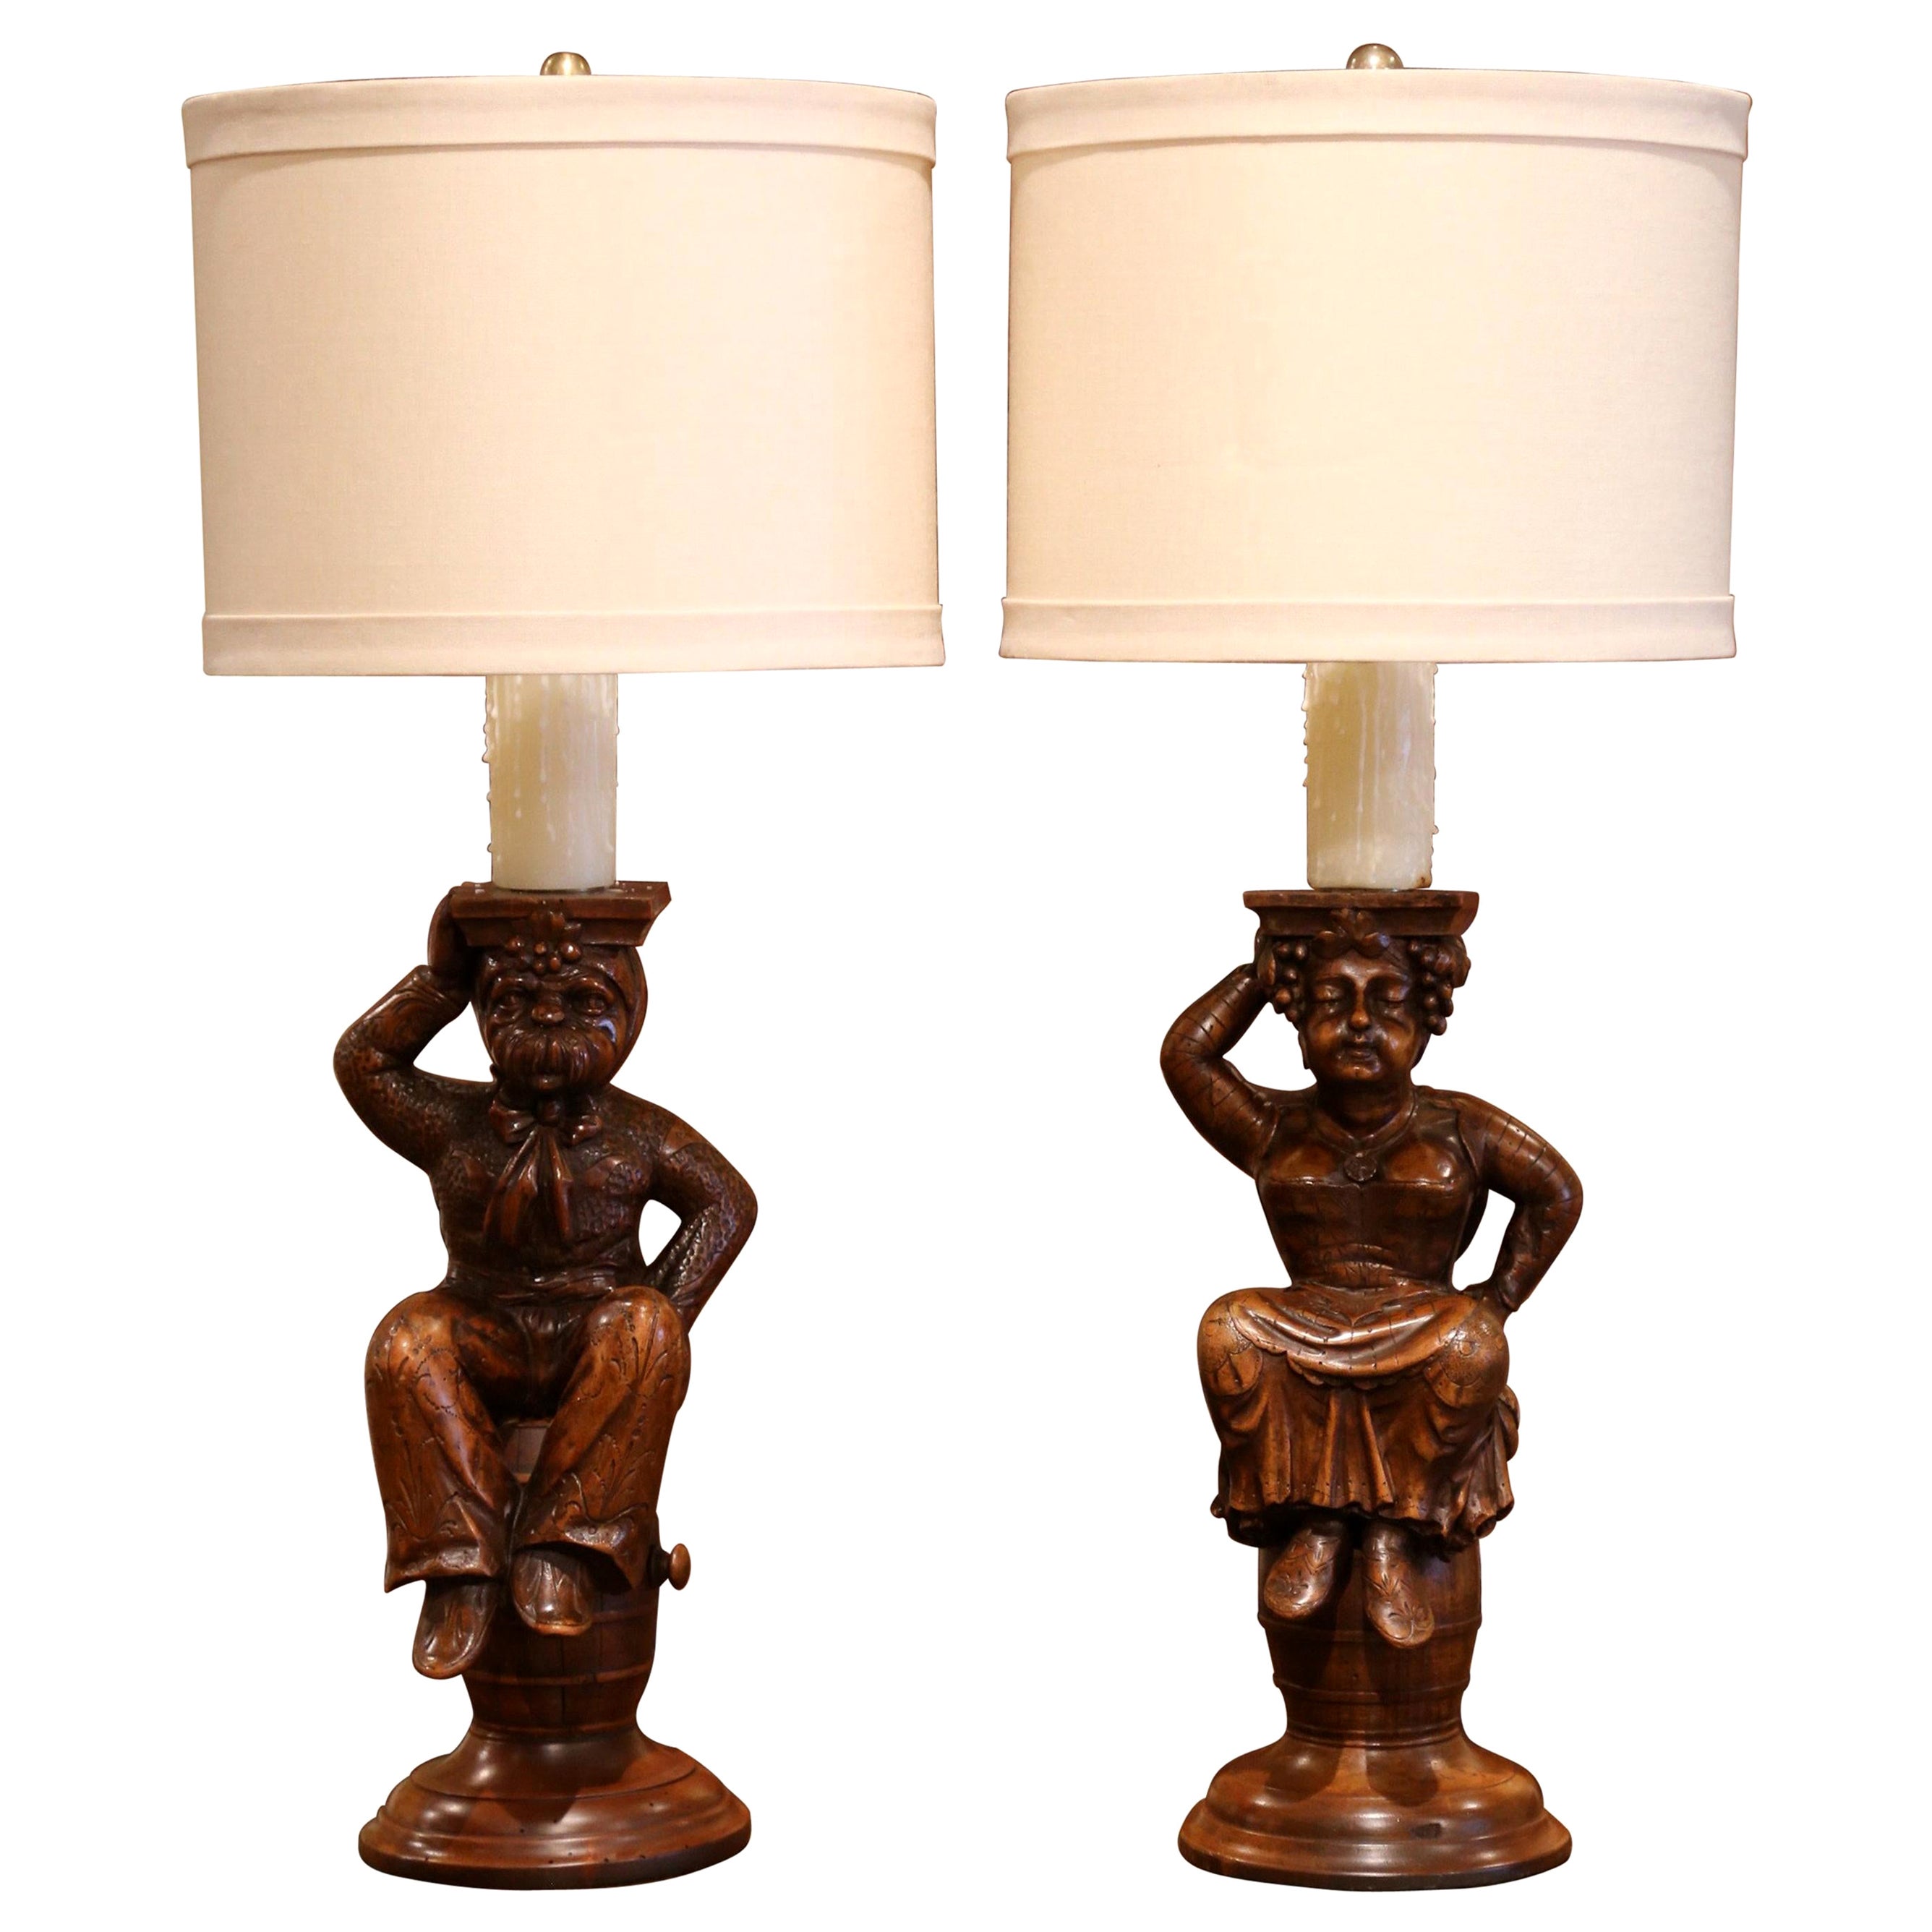 Pair of 19th Century French Carved Walnut Cabaret Figures Lamp Bases For Sale